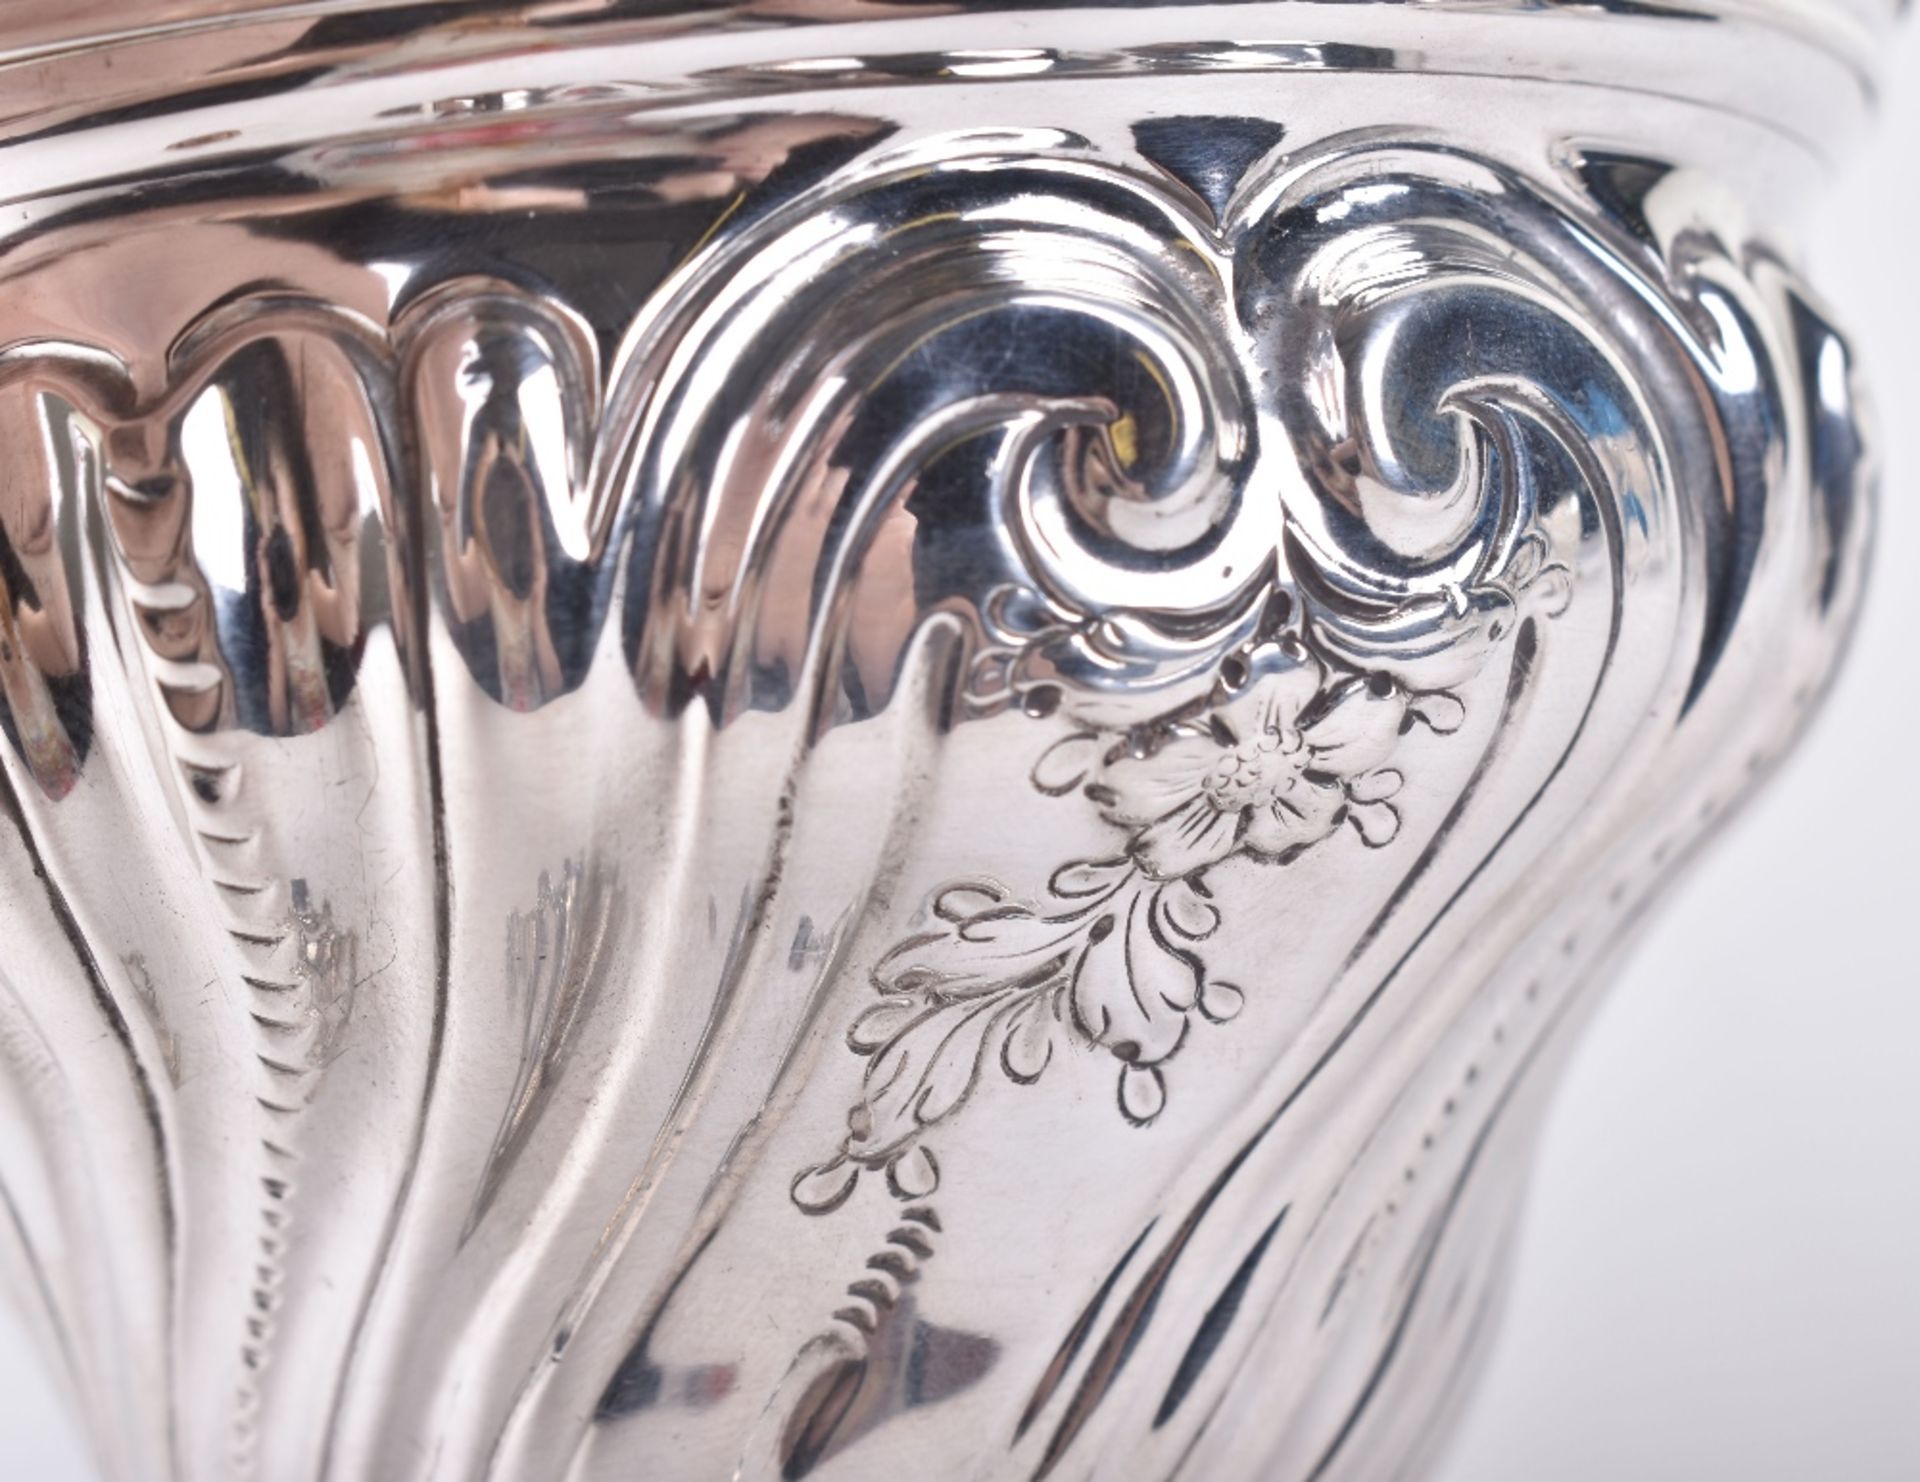 A George III silver sugar bowl and lid, William Plummer, London 1760 - Image 5 of 7